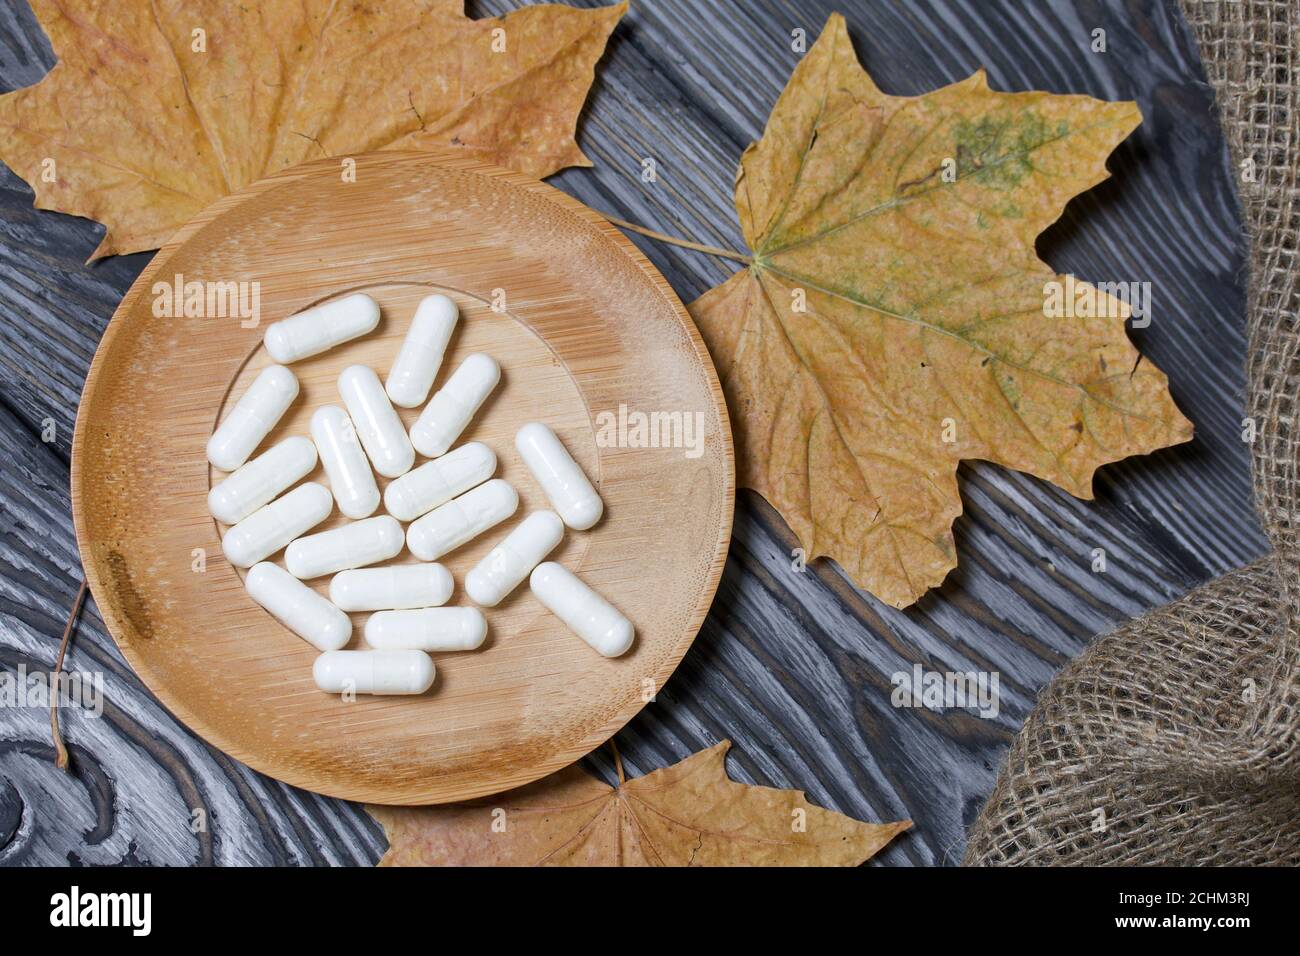 A handful of white pills on a wooden saucer. Among the dried up maple leaves. On a pine board surface. Stock Photo